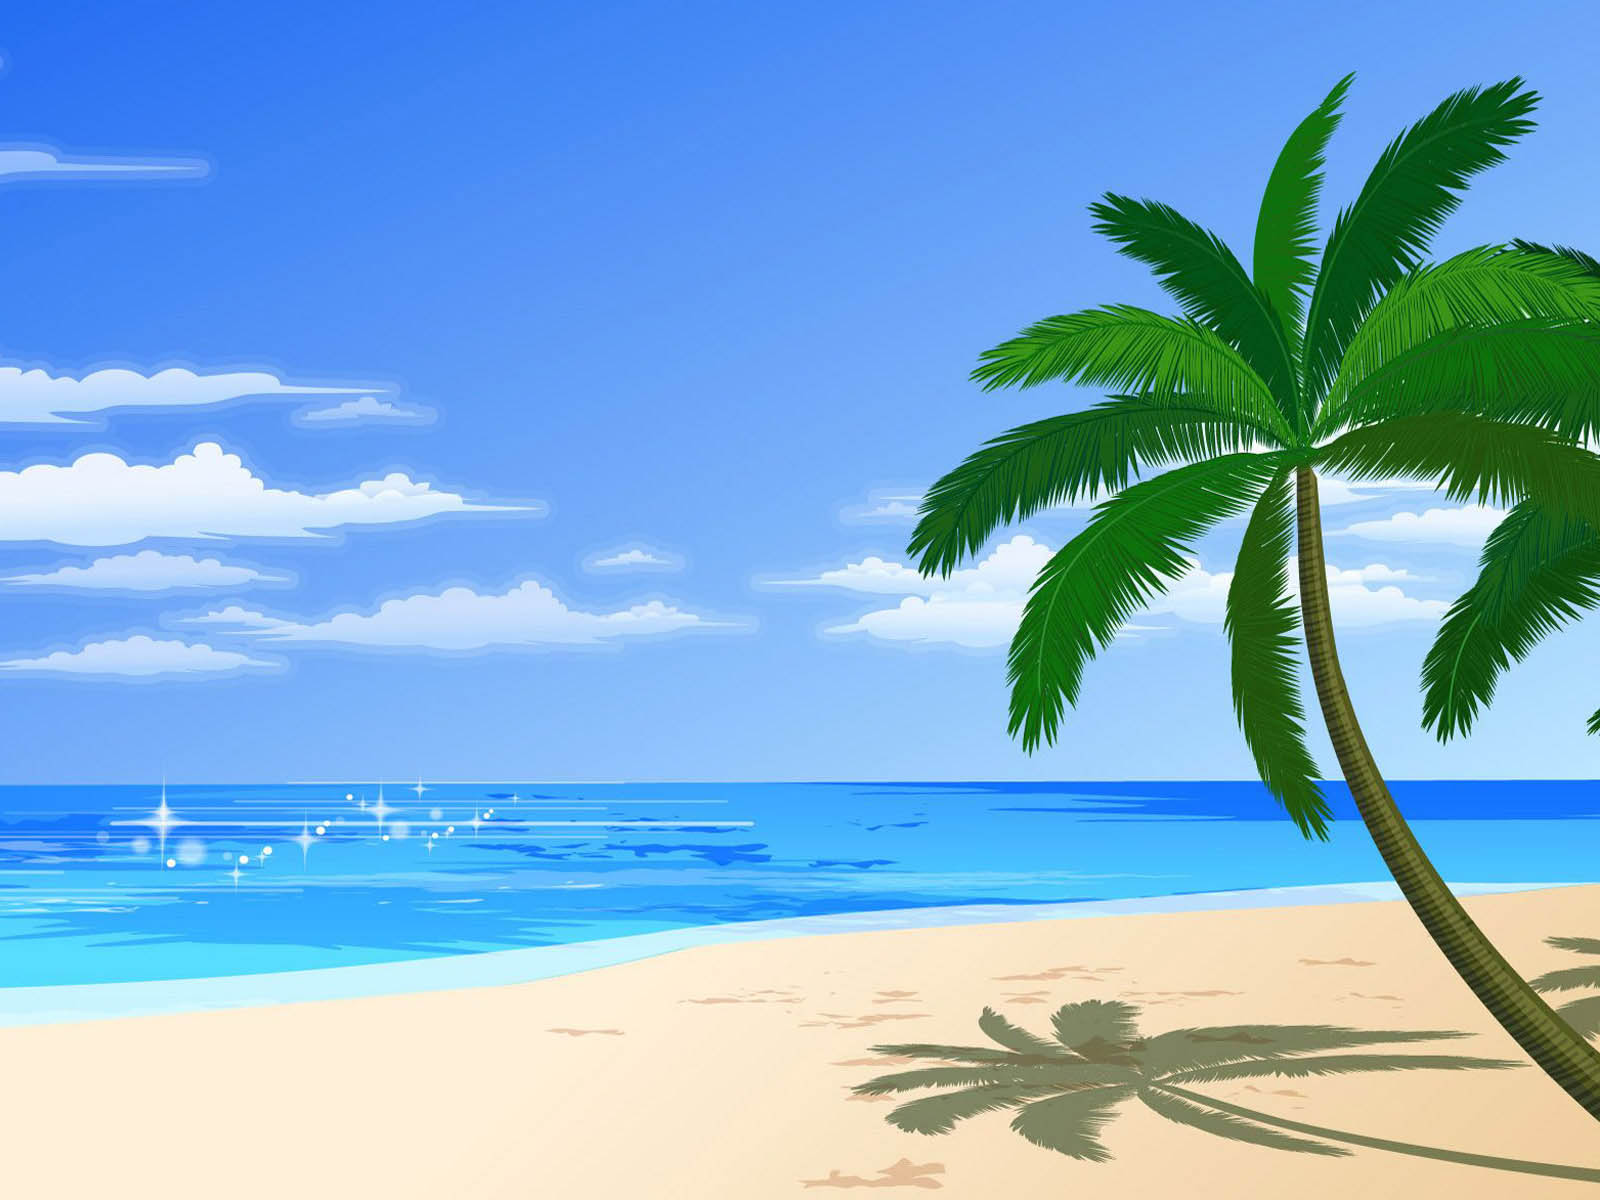 Beach Cartoon Images Free Download Clipart